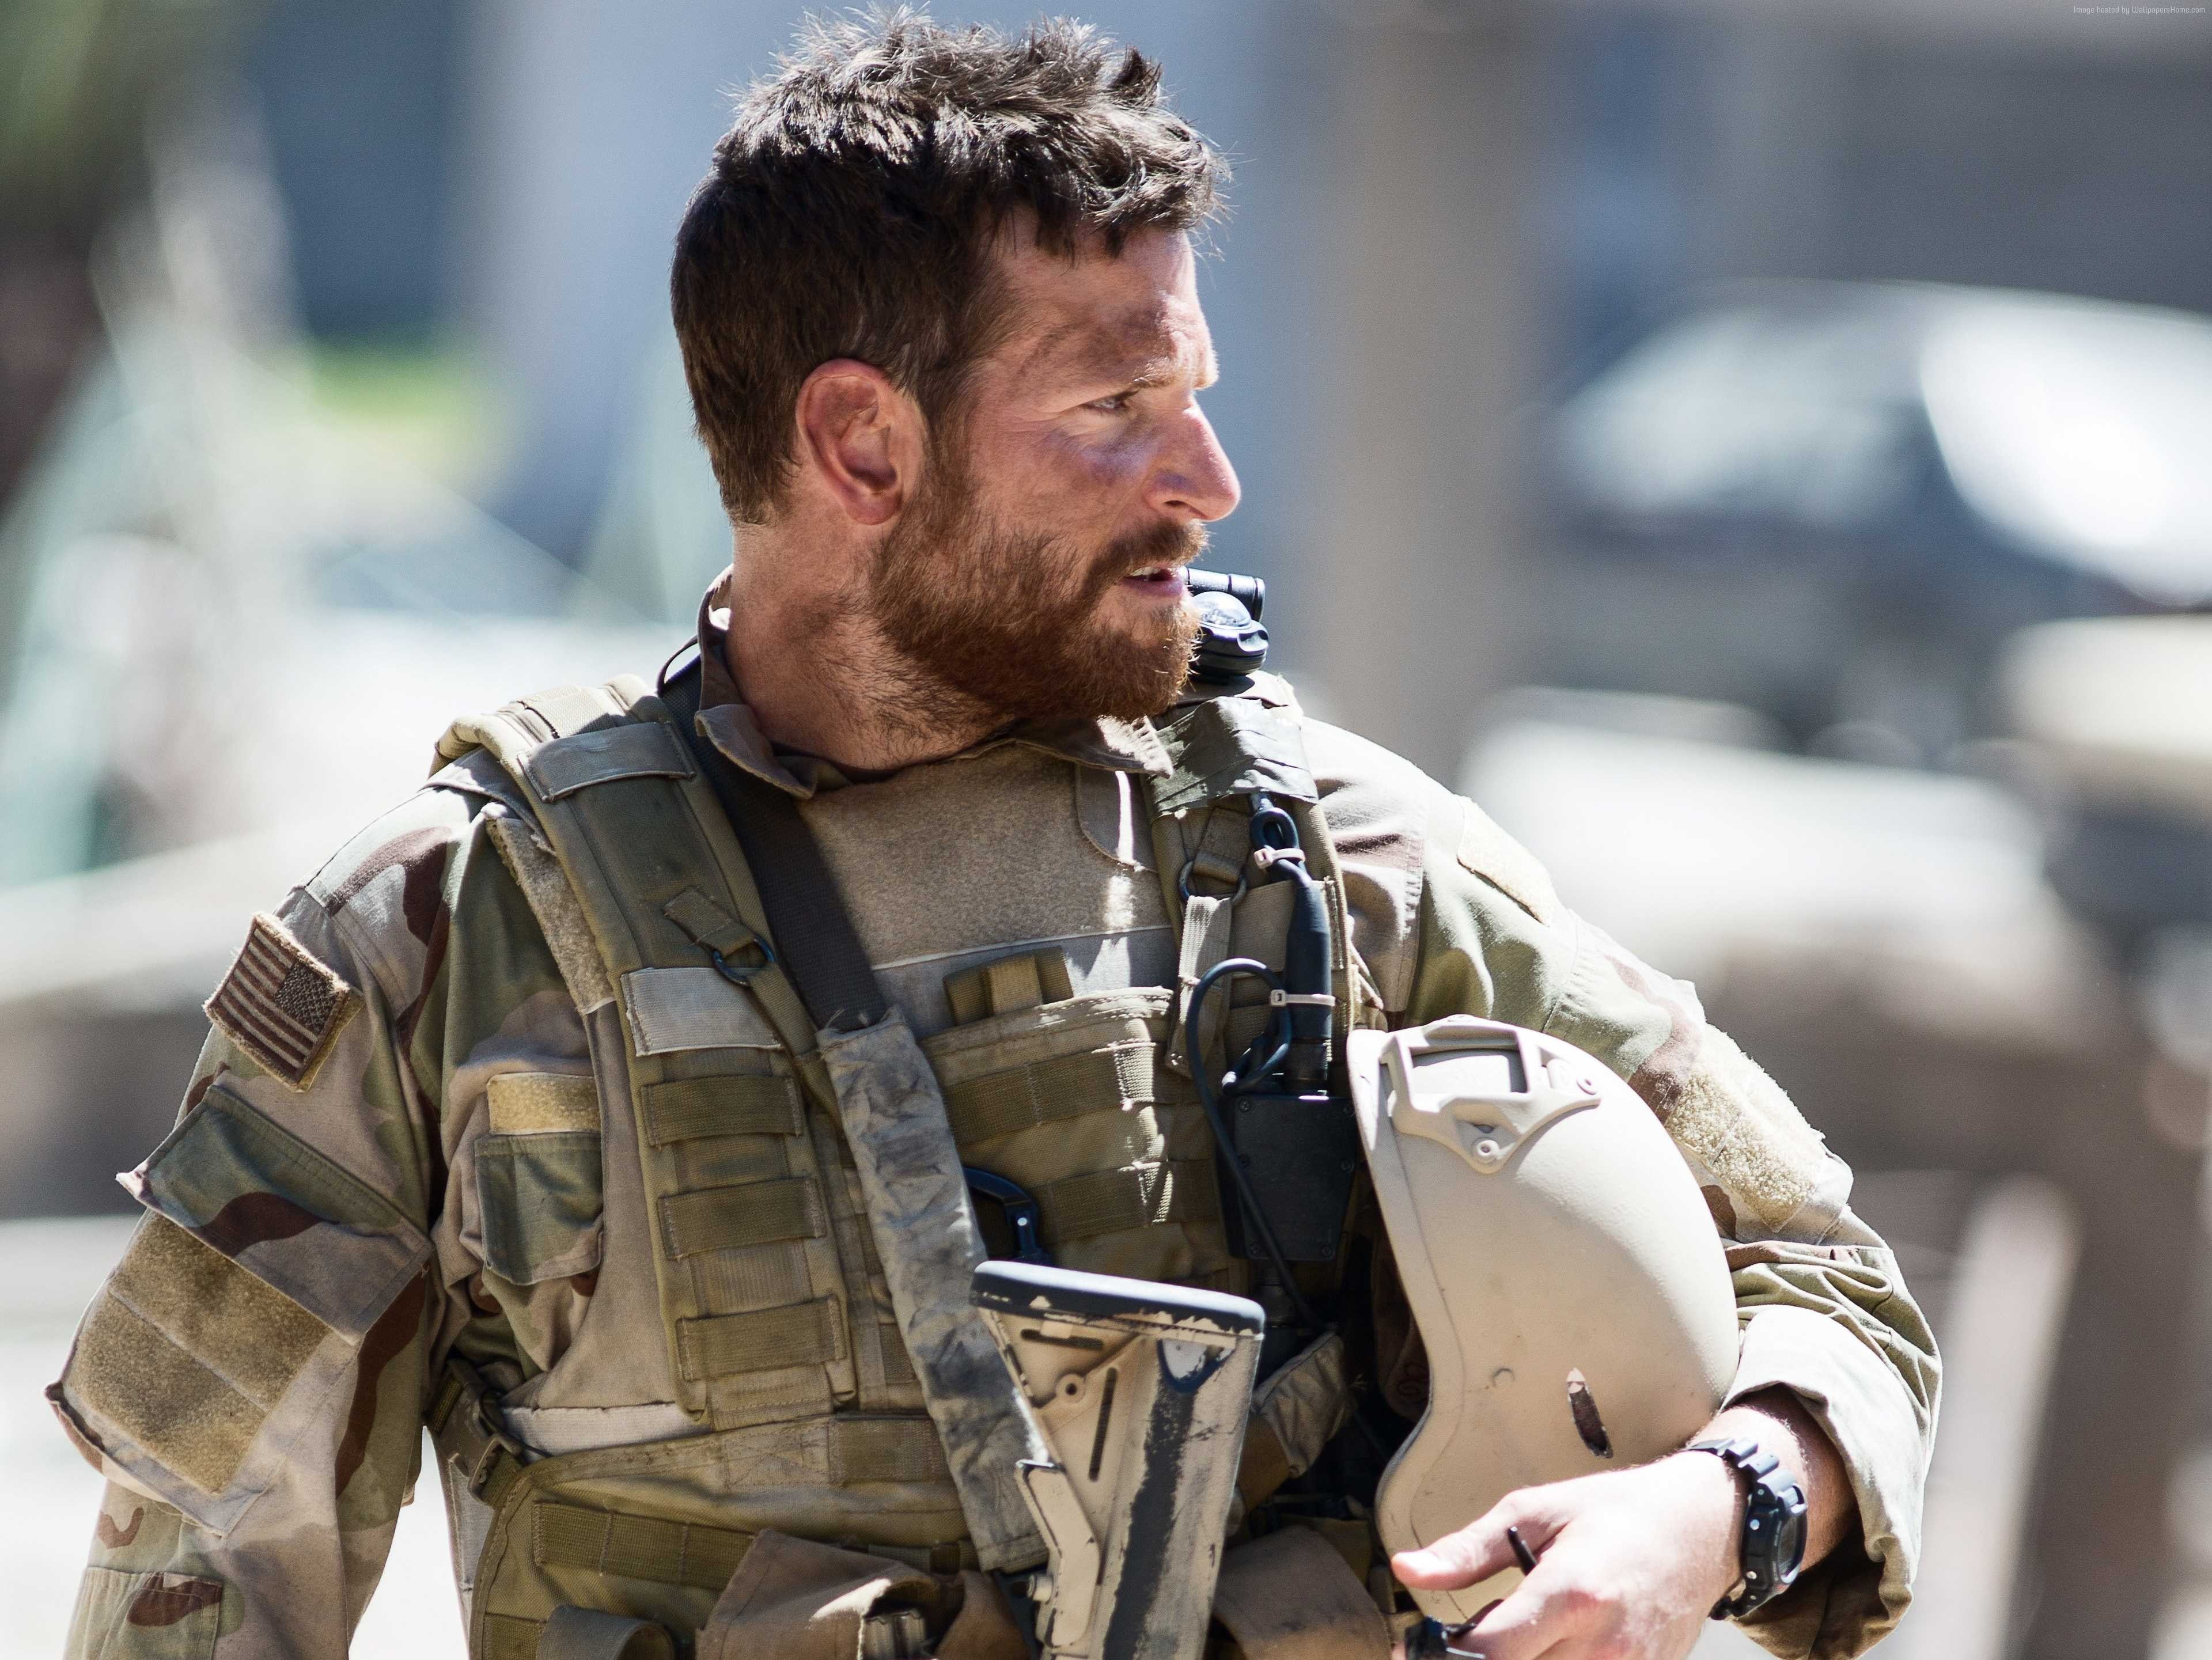 Academy Awards, Sienna Miller, Chris Kyle, biographical, Best Movies of 2015